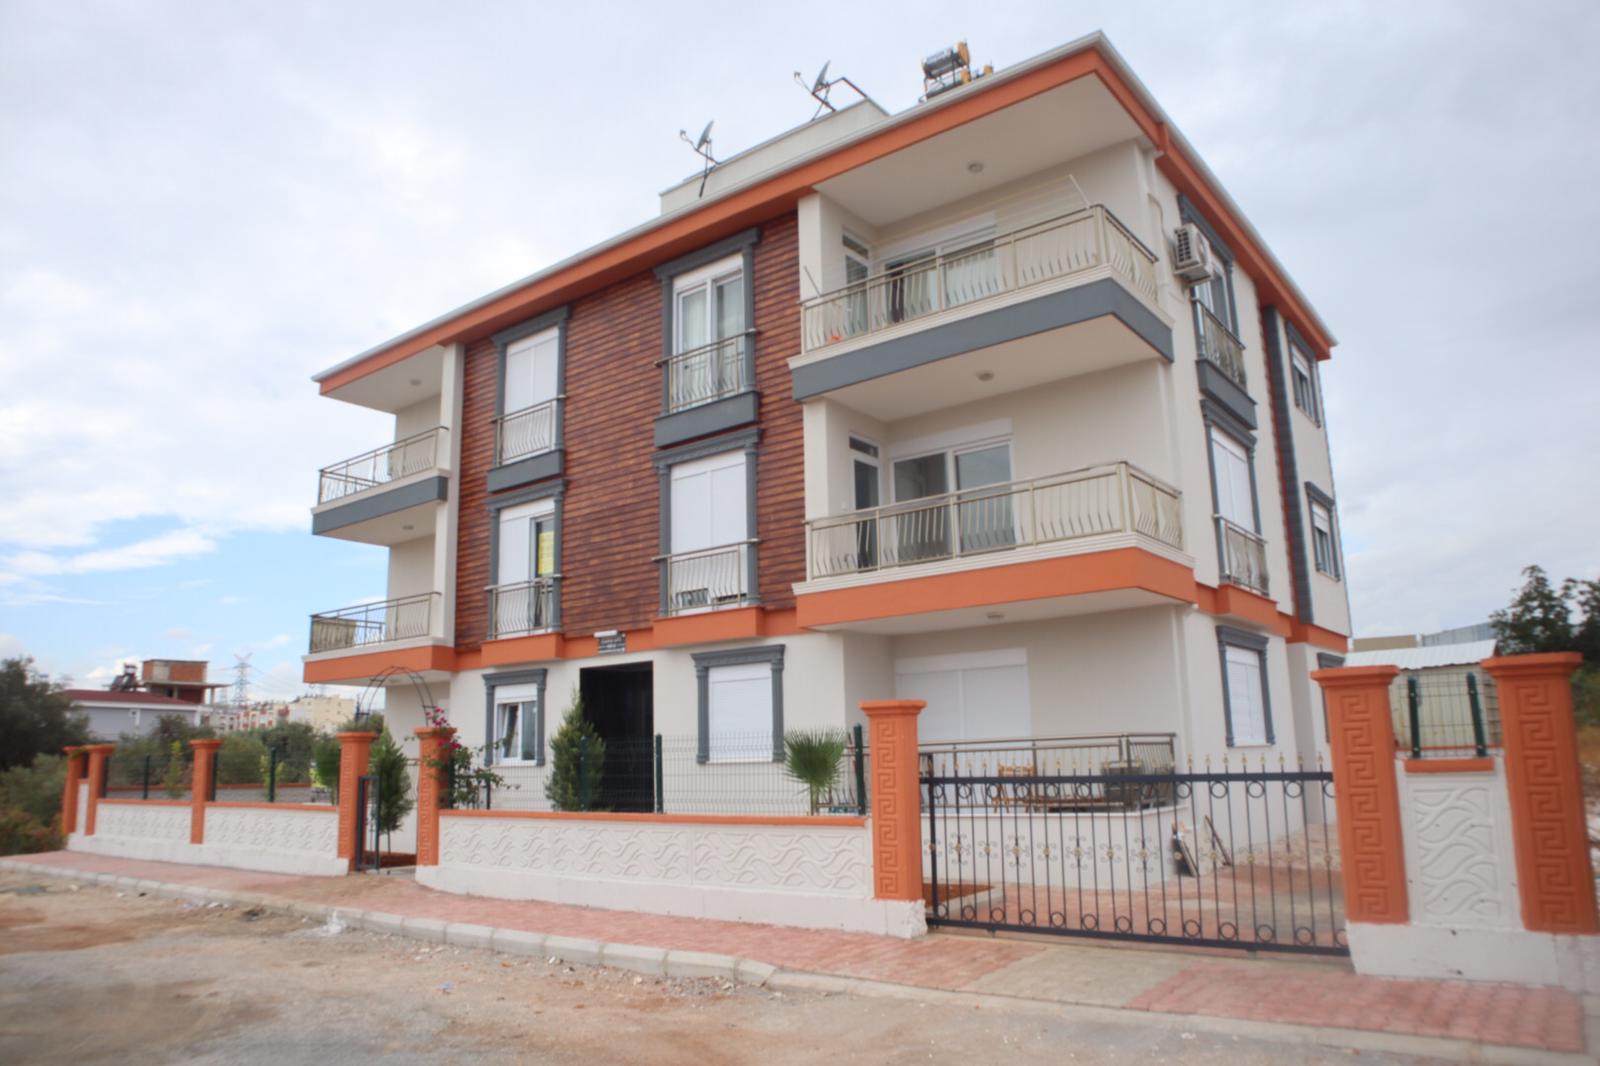 Apartments For Sale with Good Price in Antalya Turkey